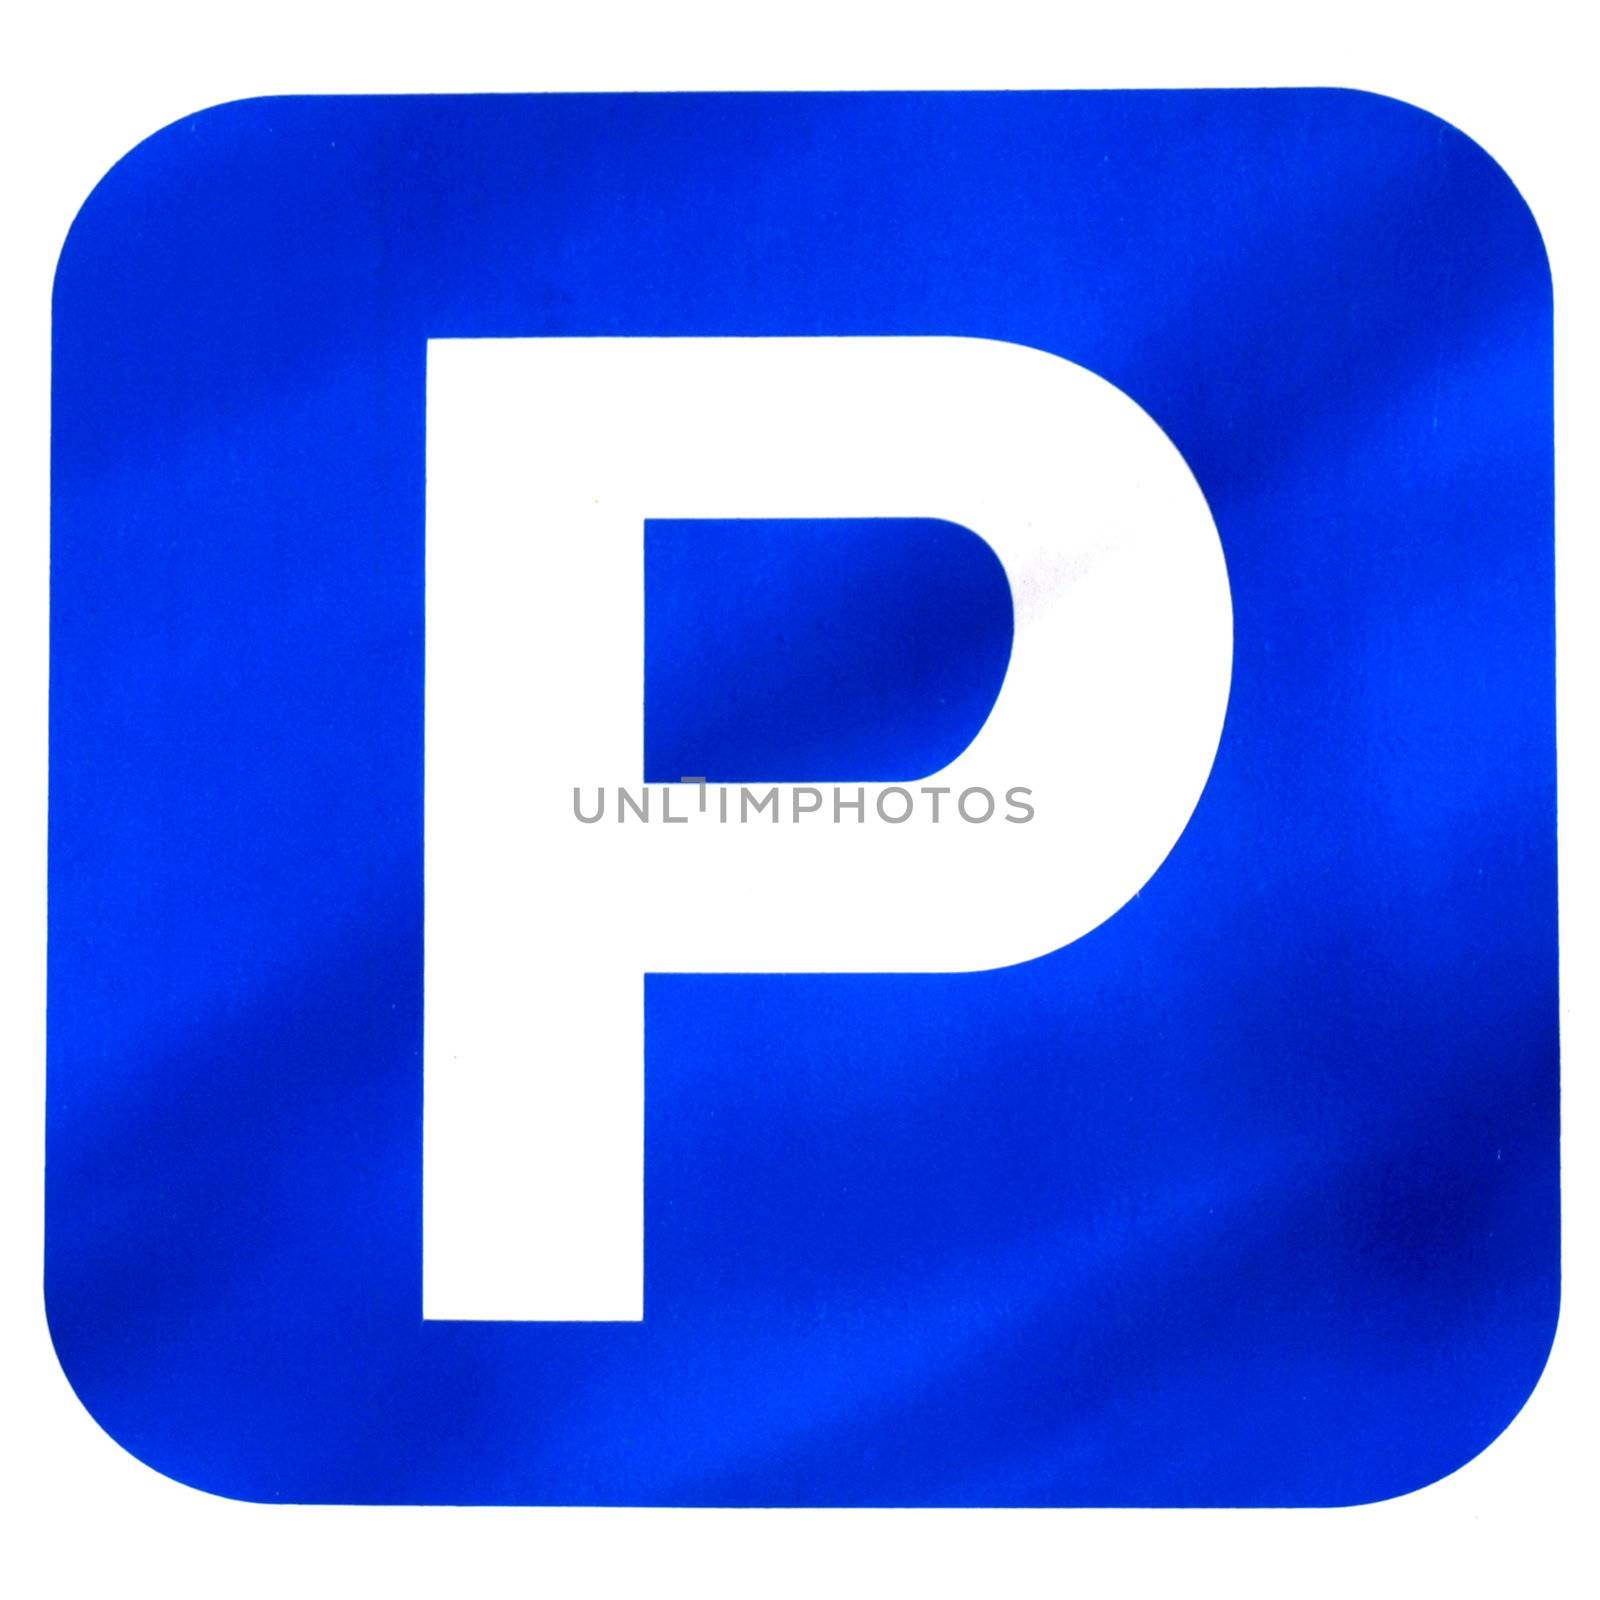 Car parking sign isolated over white background